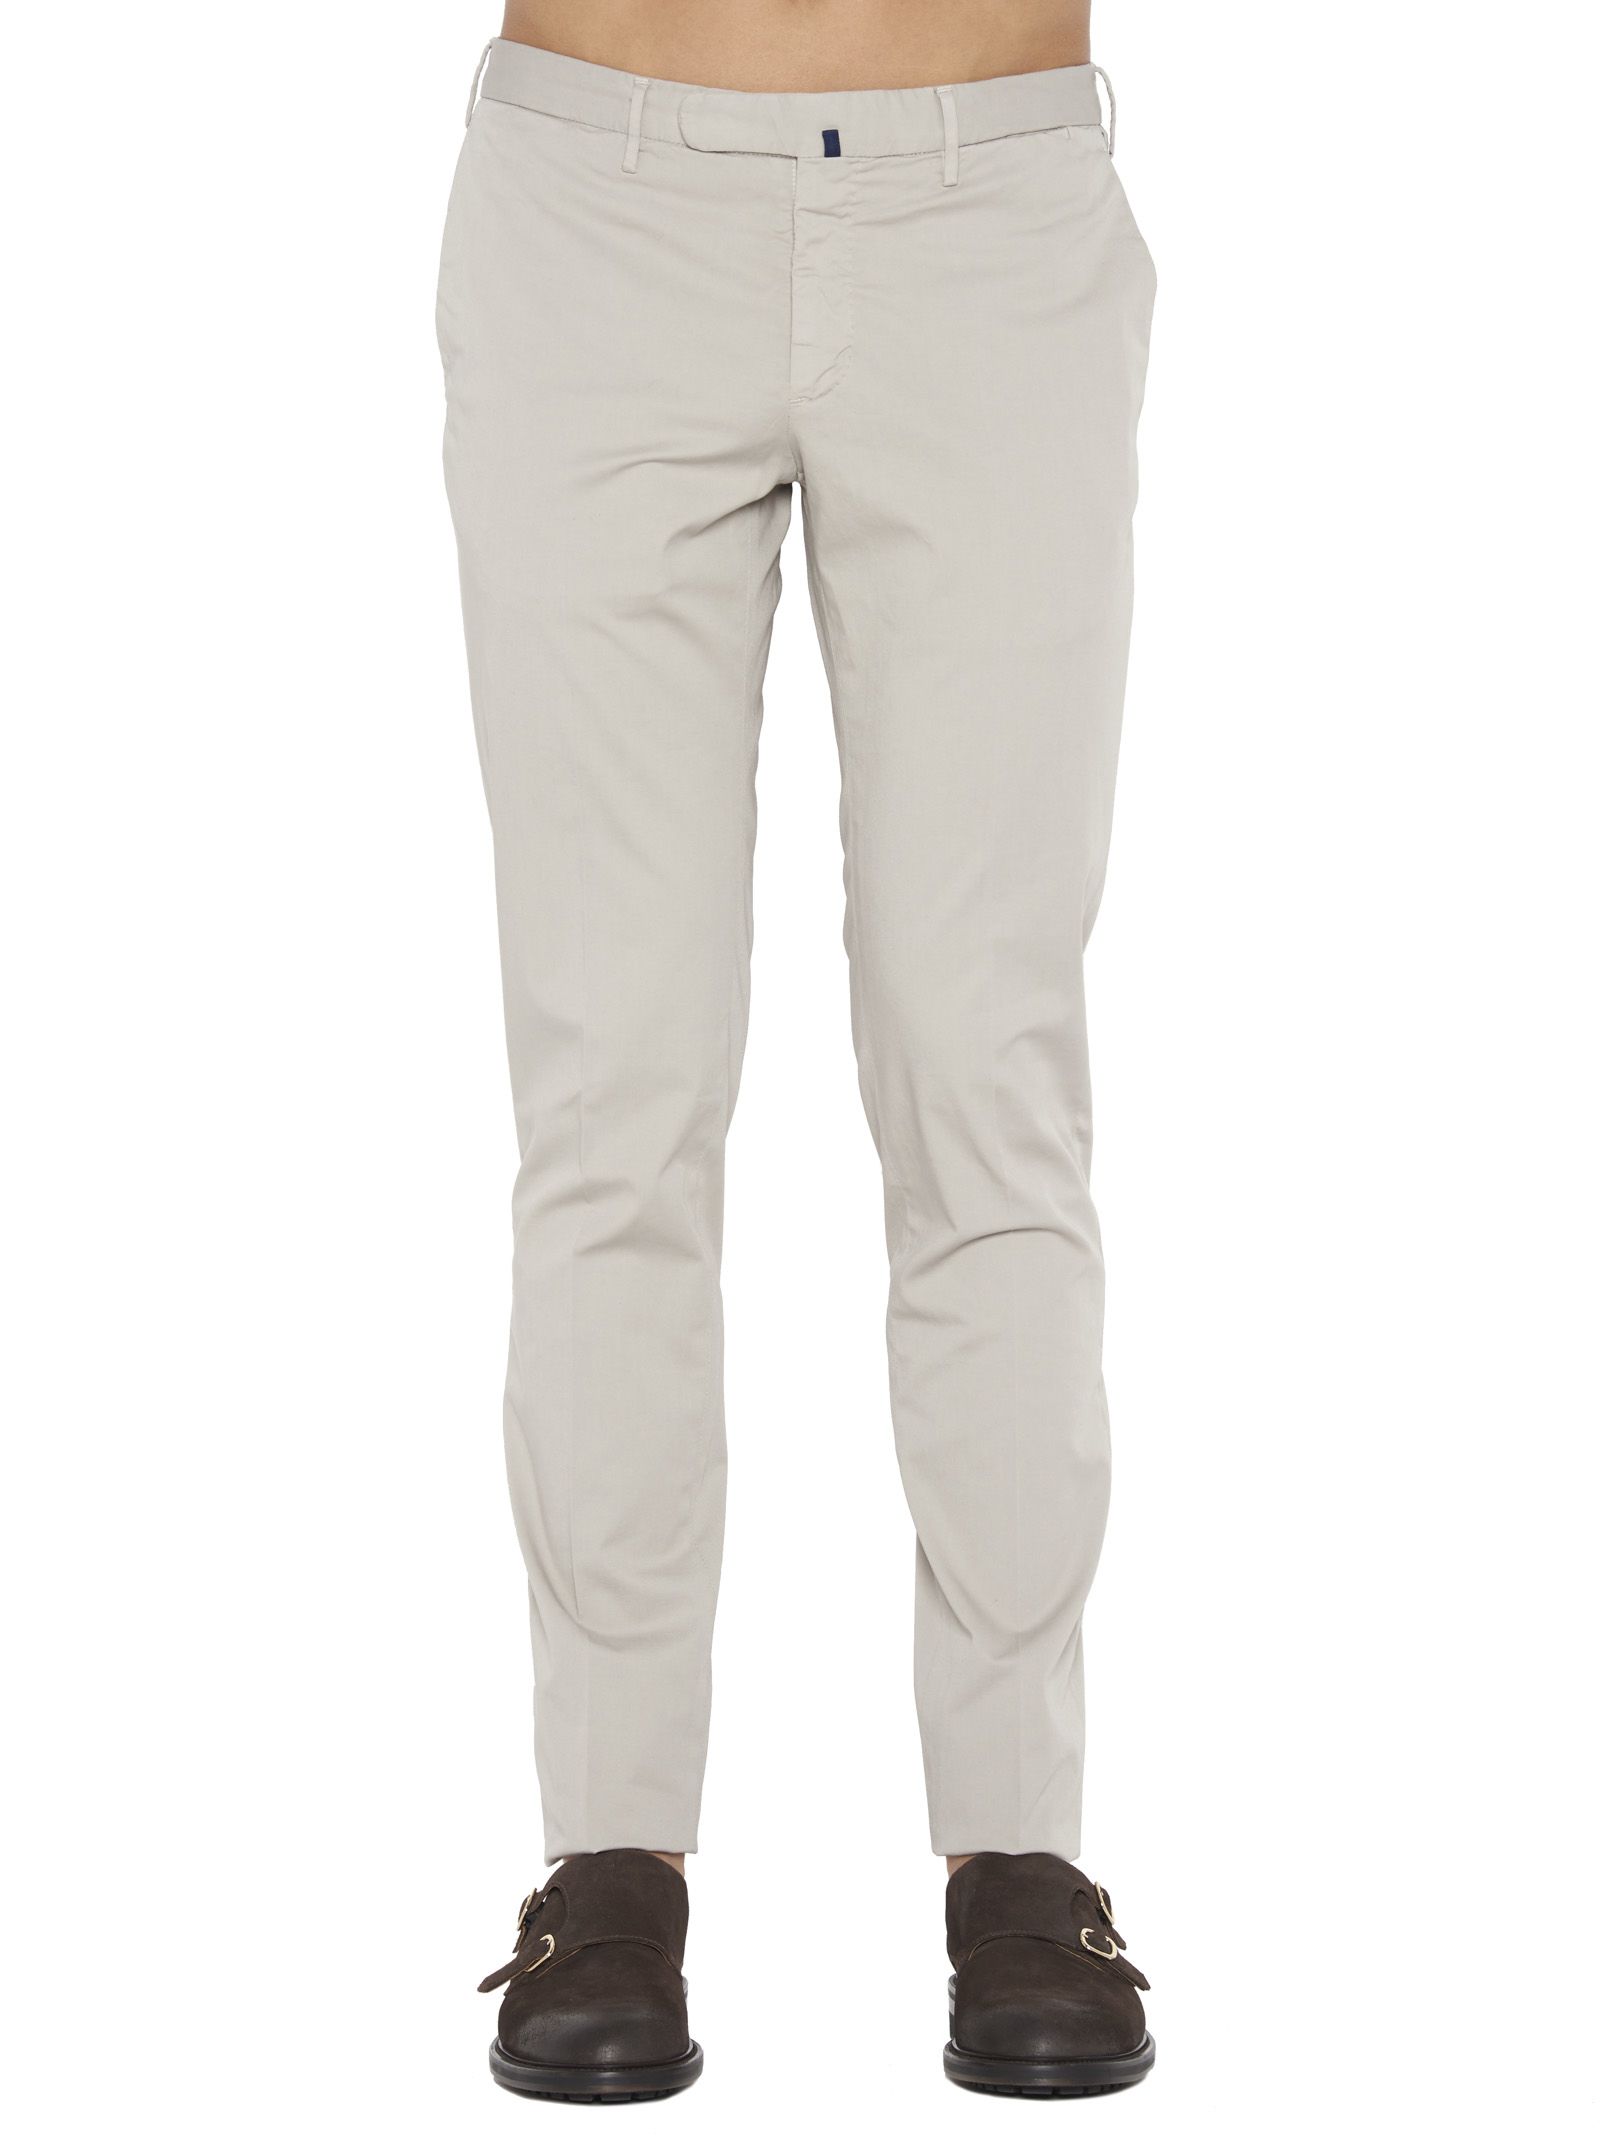 italist | Best price in the market for Incotex Incotex Pants - Grey